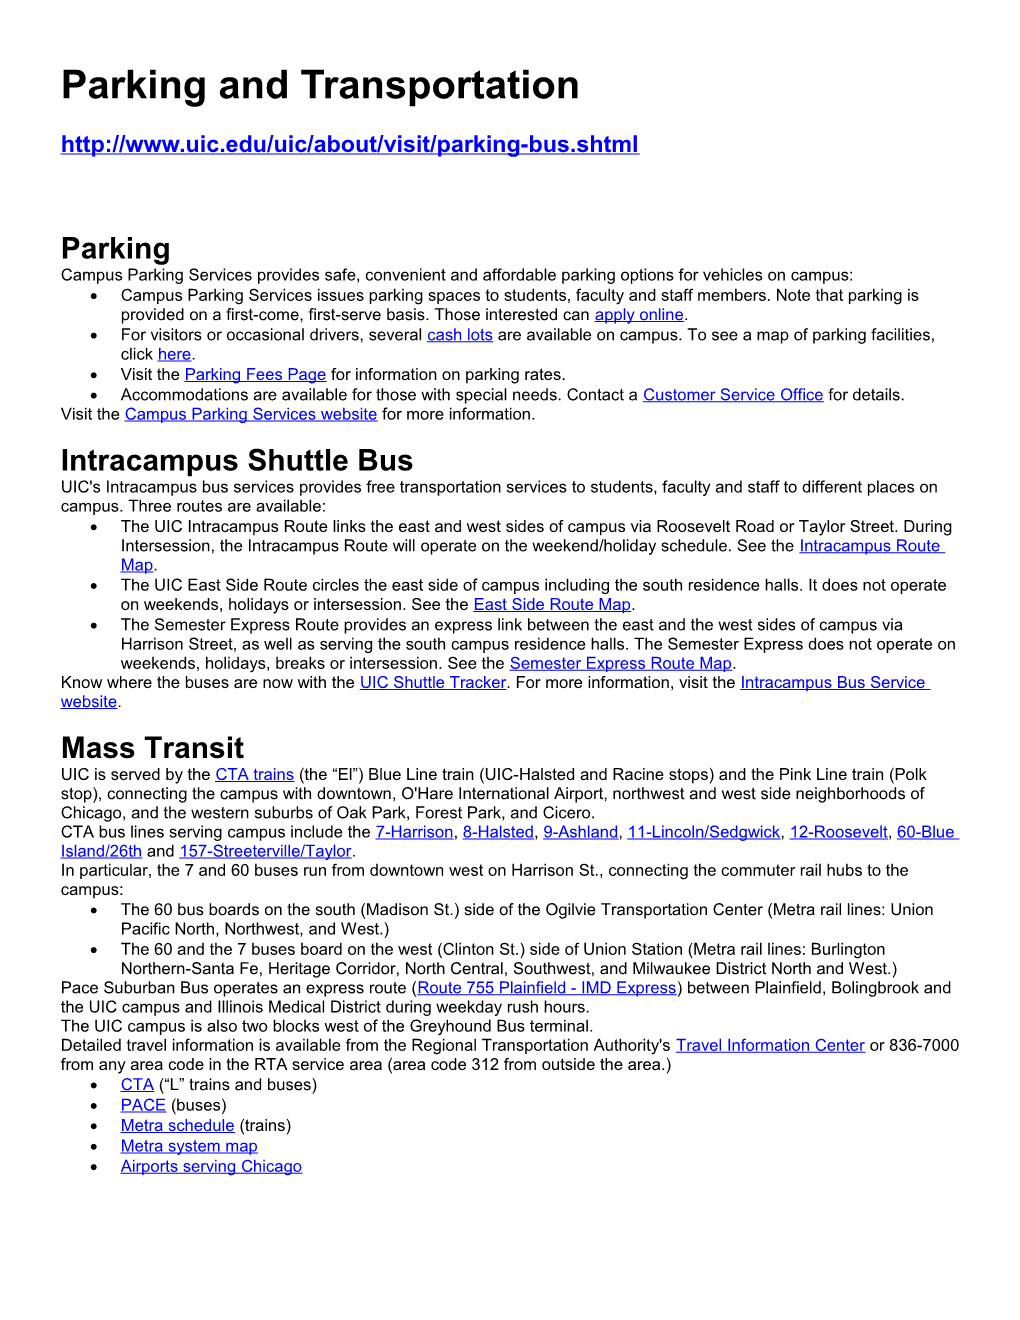 Parking and Transportation s1